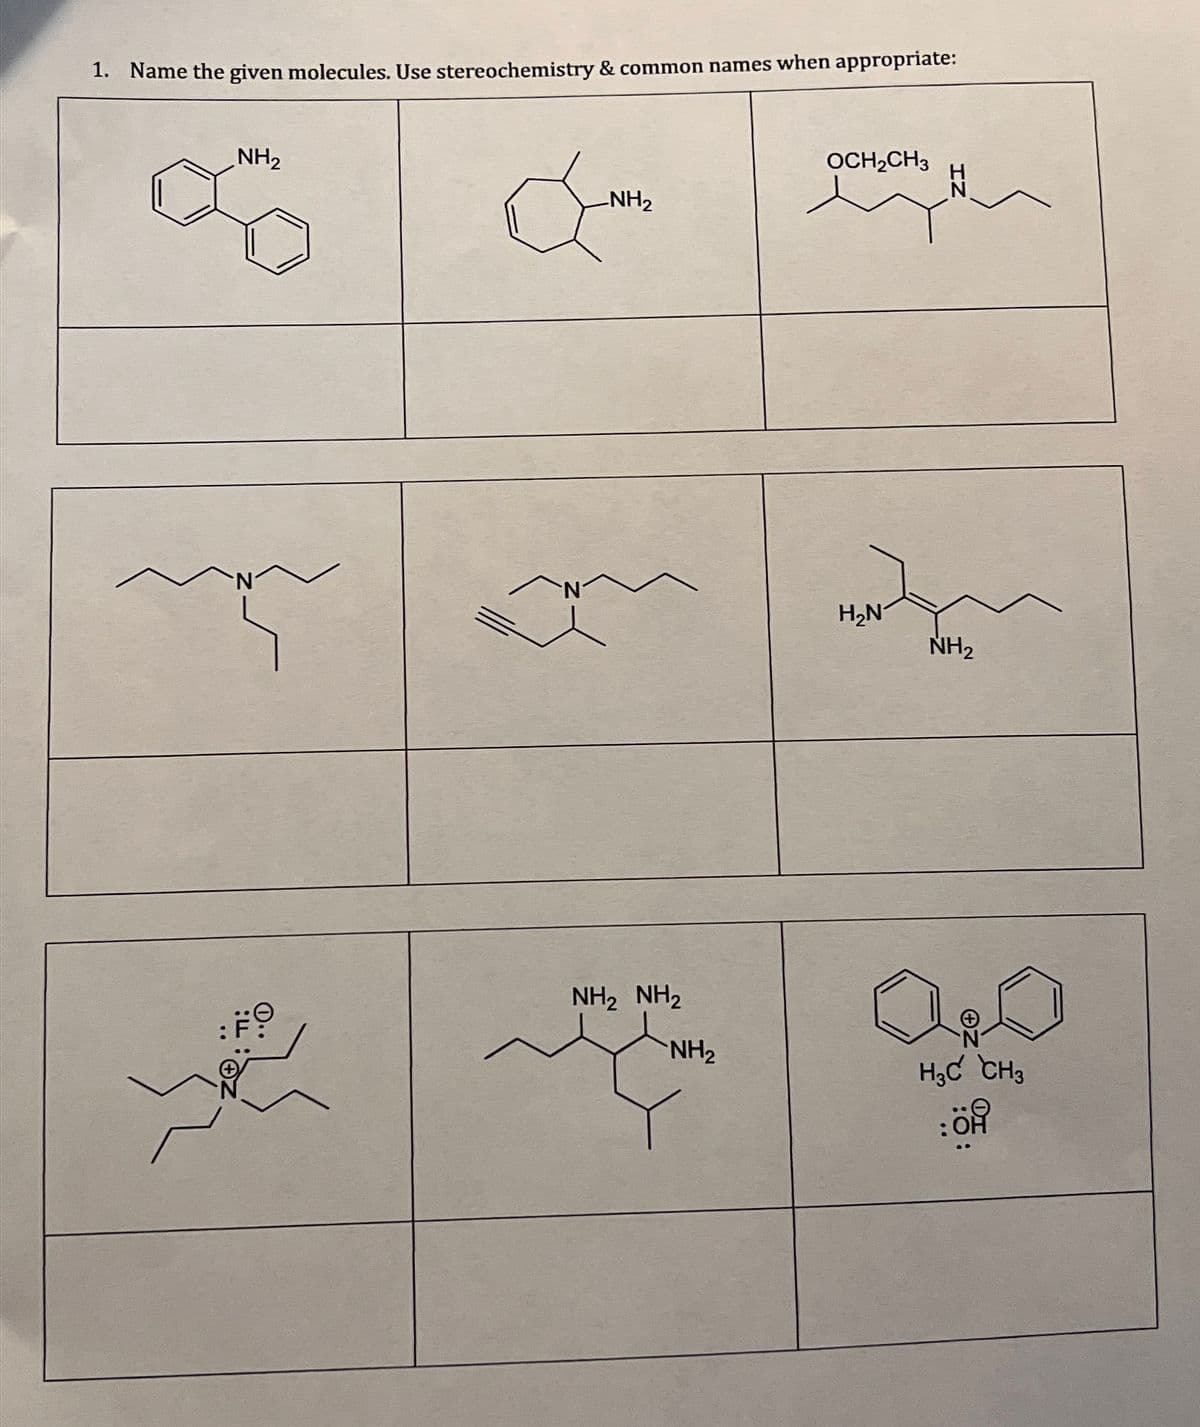 1. Name the given molecules. Use stereochemistry & common names when appropriate:
NH2
1..
NH2
OCH2CH3
H₂N
NH2
NH2 NH2
NH2
H3C CH3
:ÖR